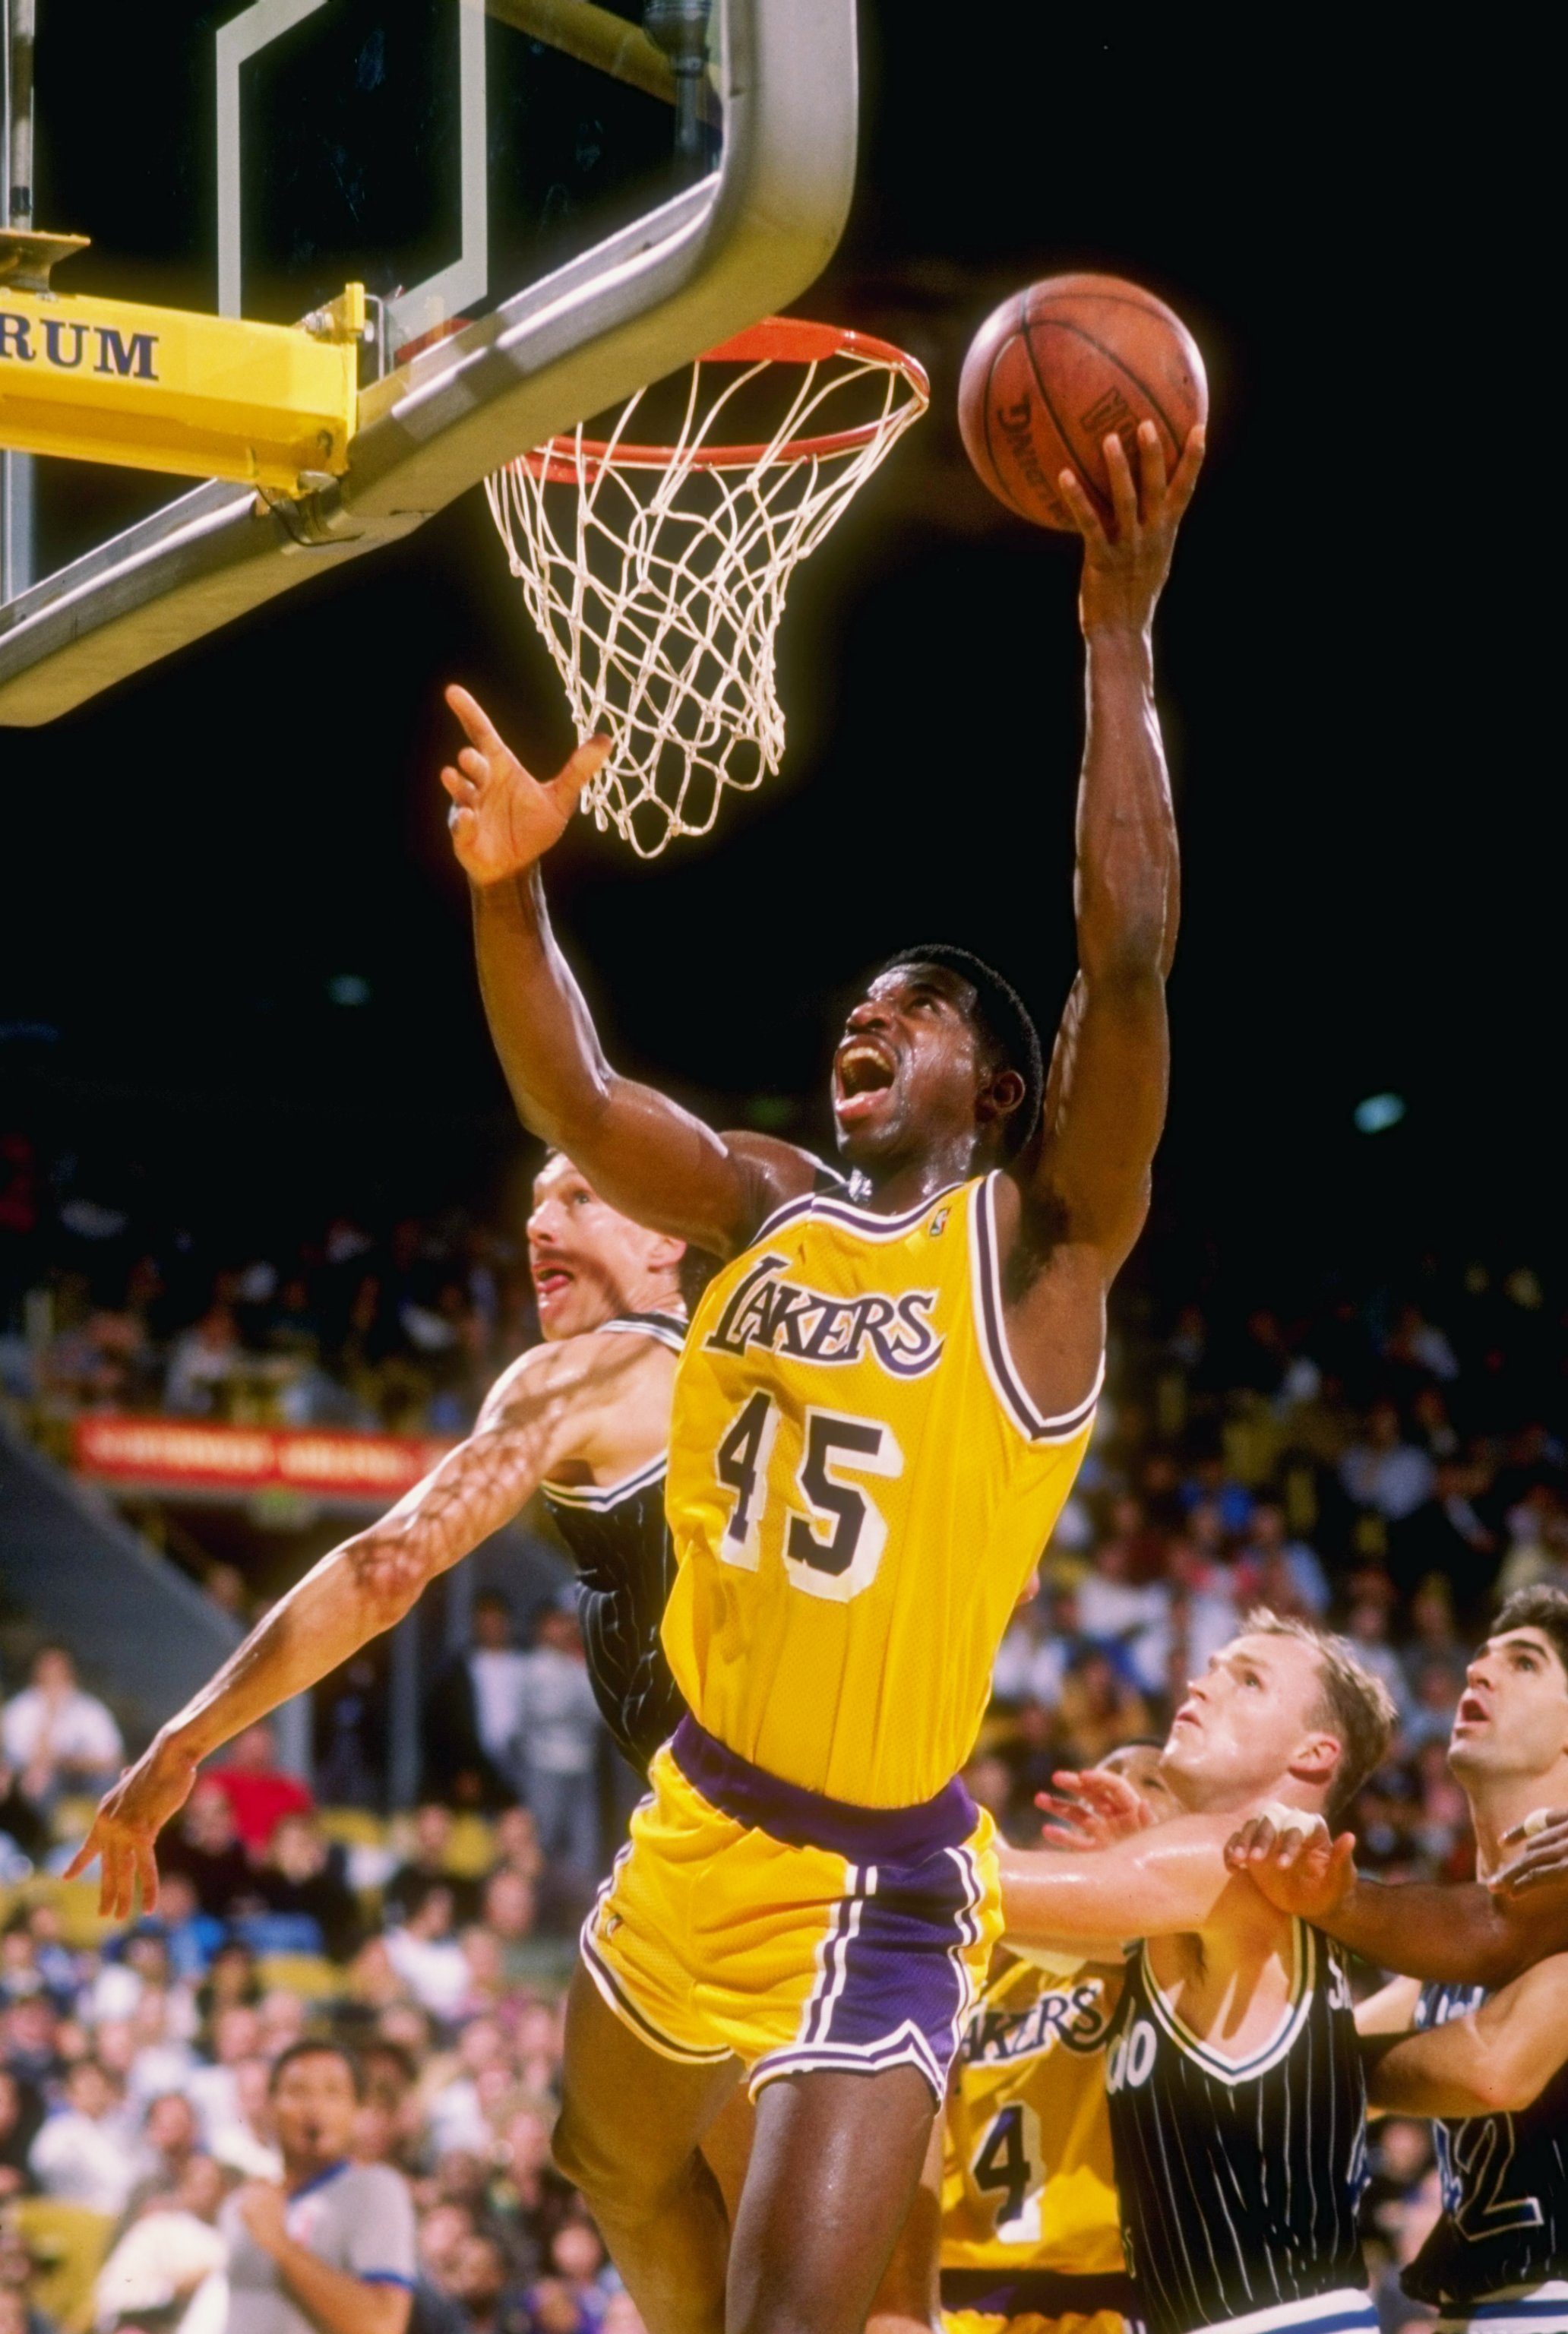 Ranking the Top 25 Players in LA Lakers History